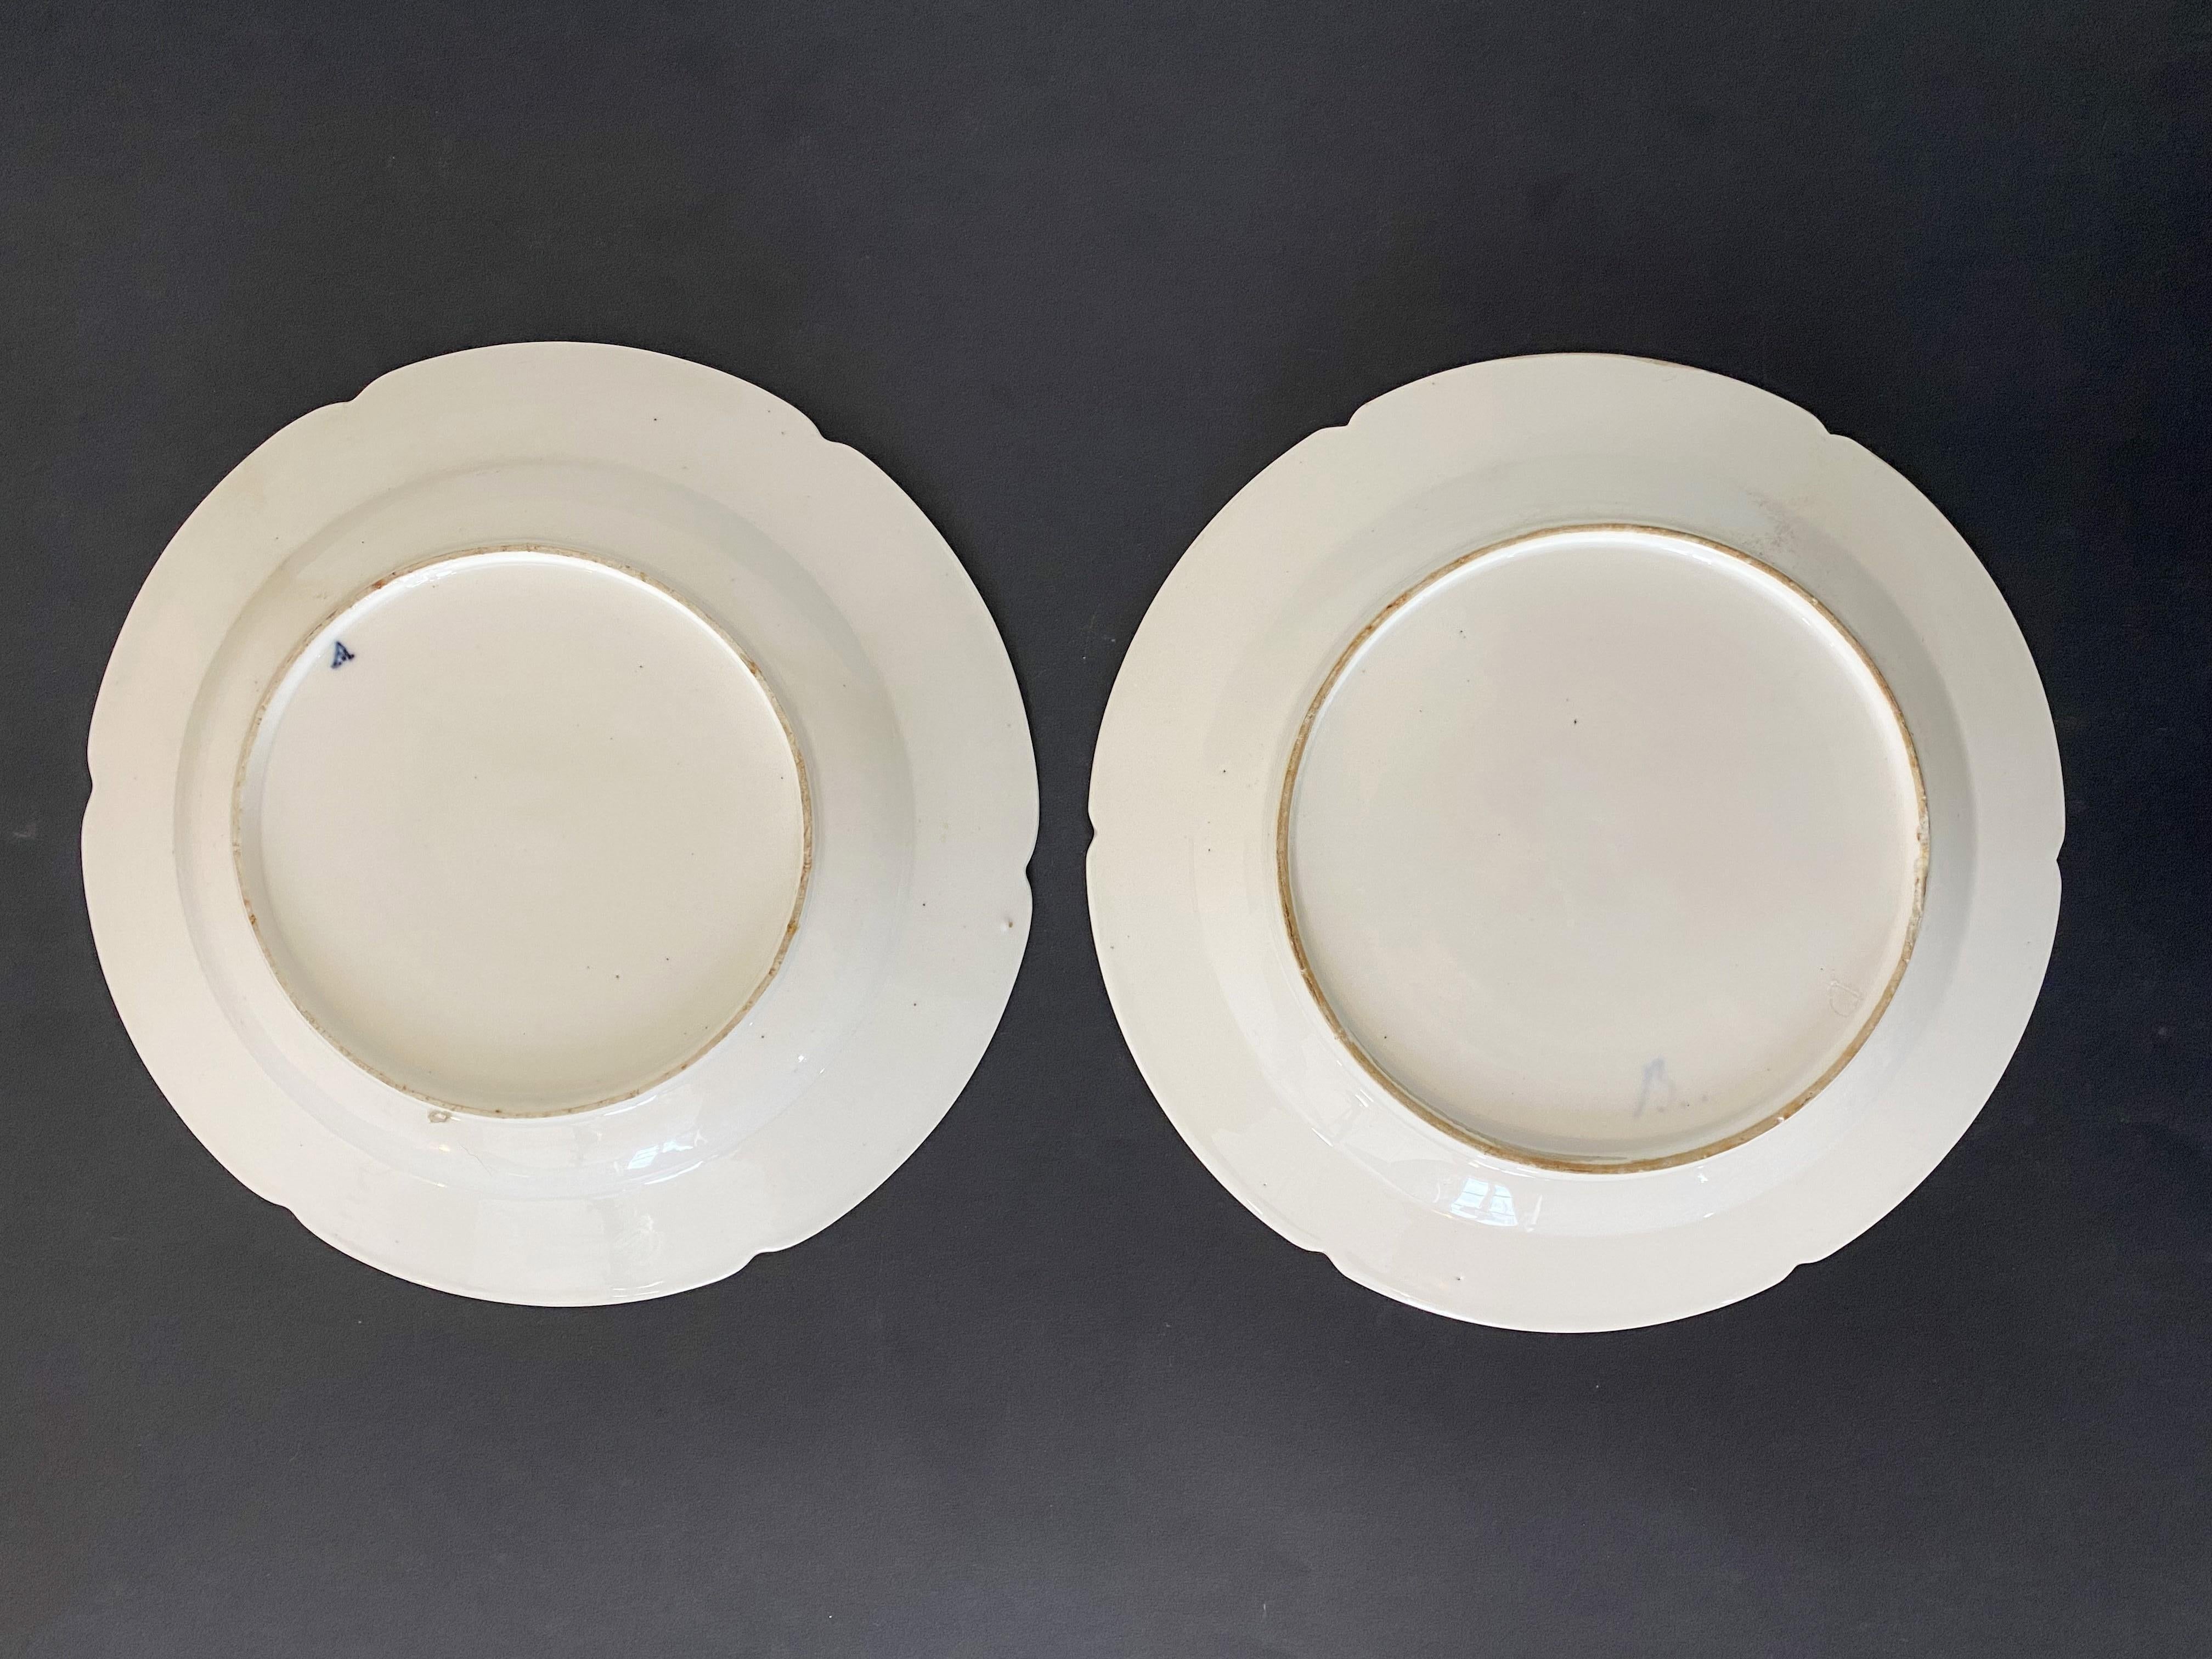 Pair of Chinese plates with floral motifs from the Compagnie des Indes dating from the 18th century. They are decorated with a bouquet of flowers and small flowers on the contours. The outline is decorated with a golden garland a little faded.